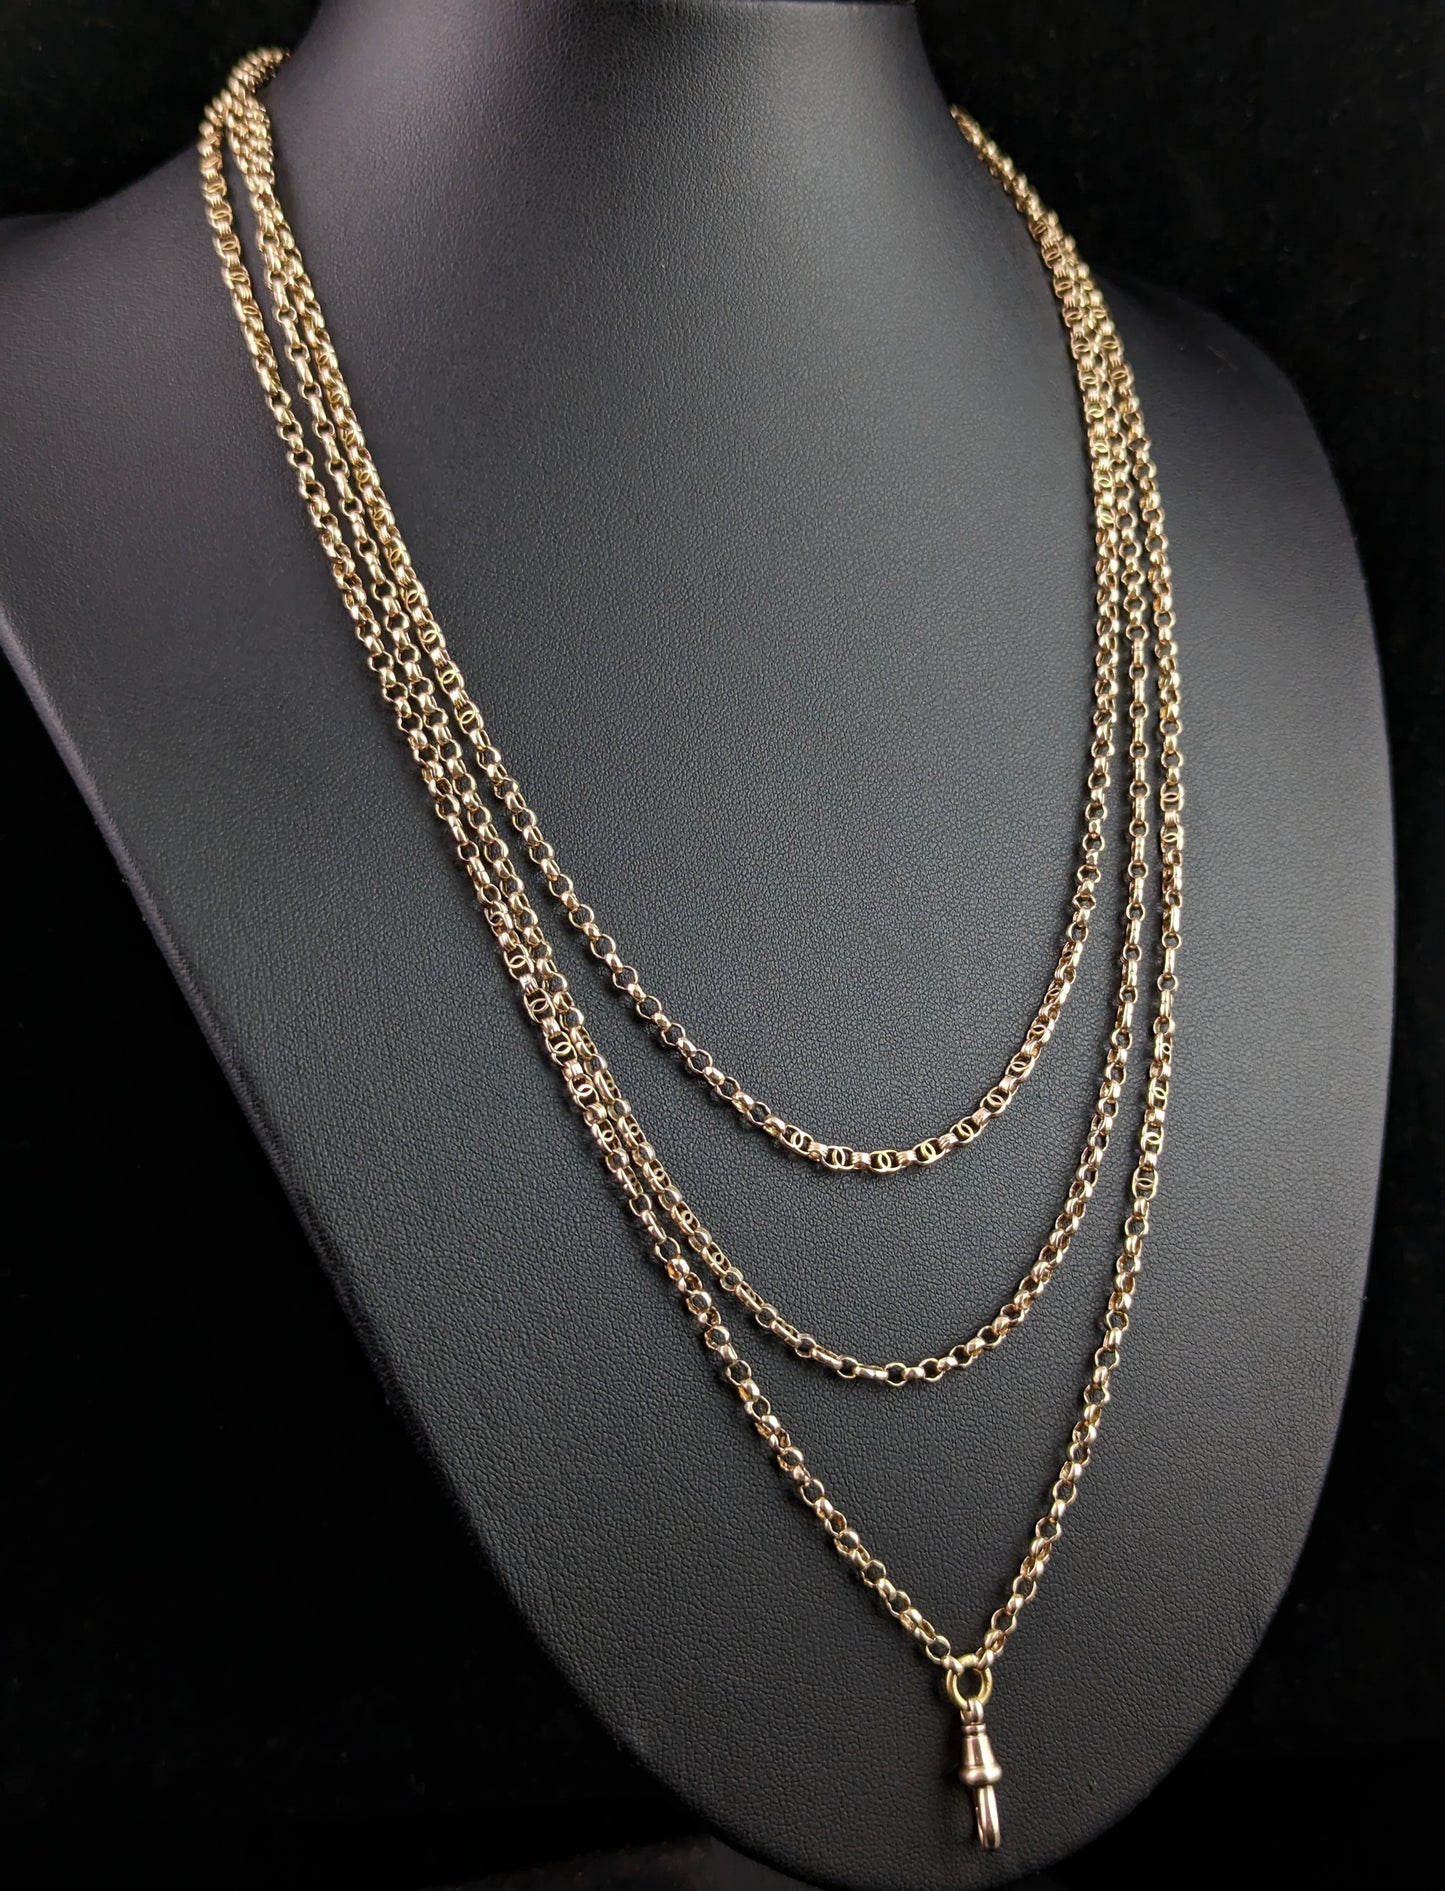 Antique 9ct gold long chain, longuard, muff chain necklace, Victorian